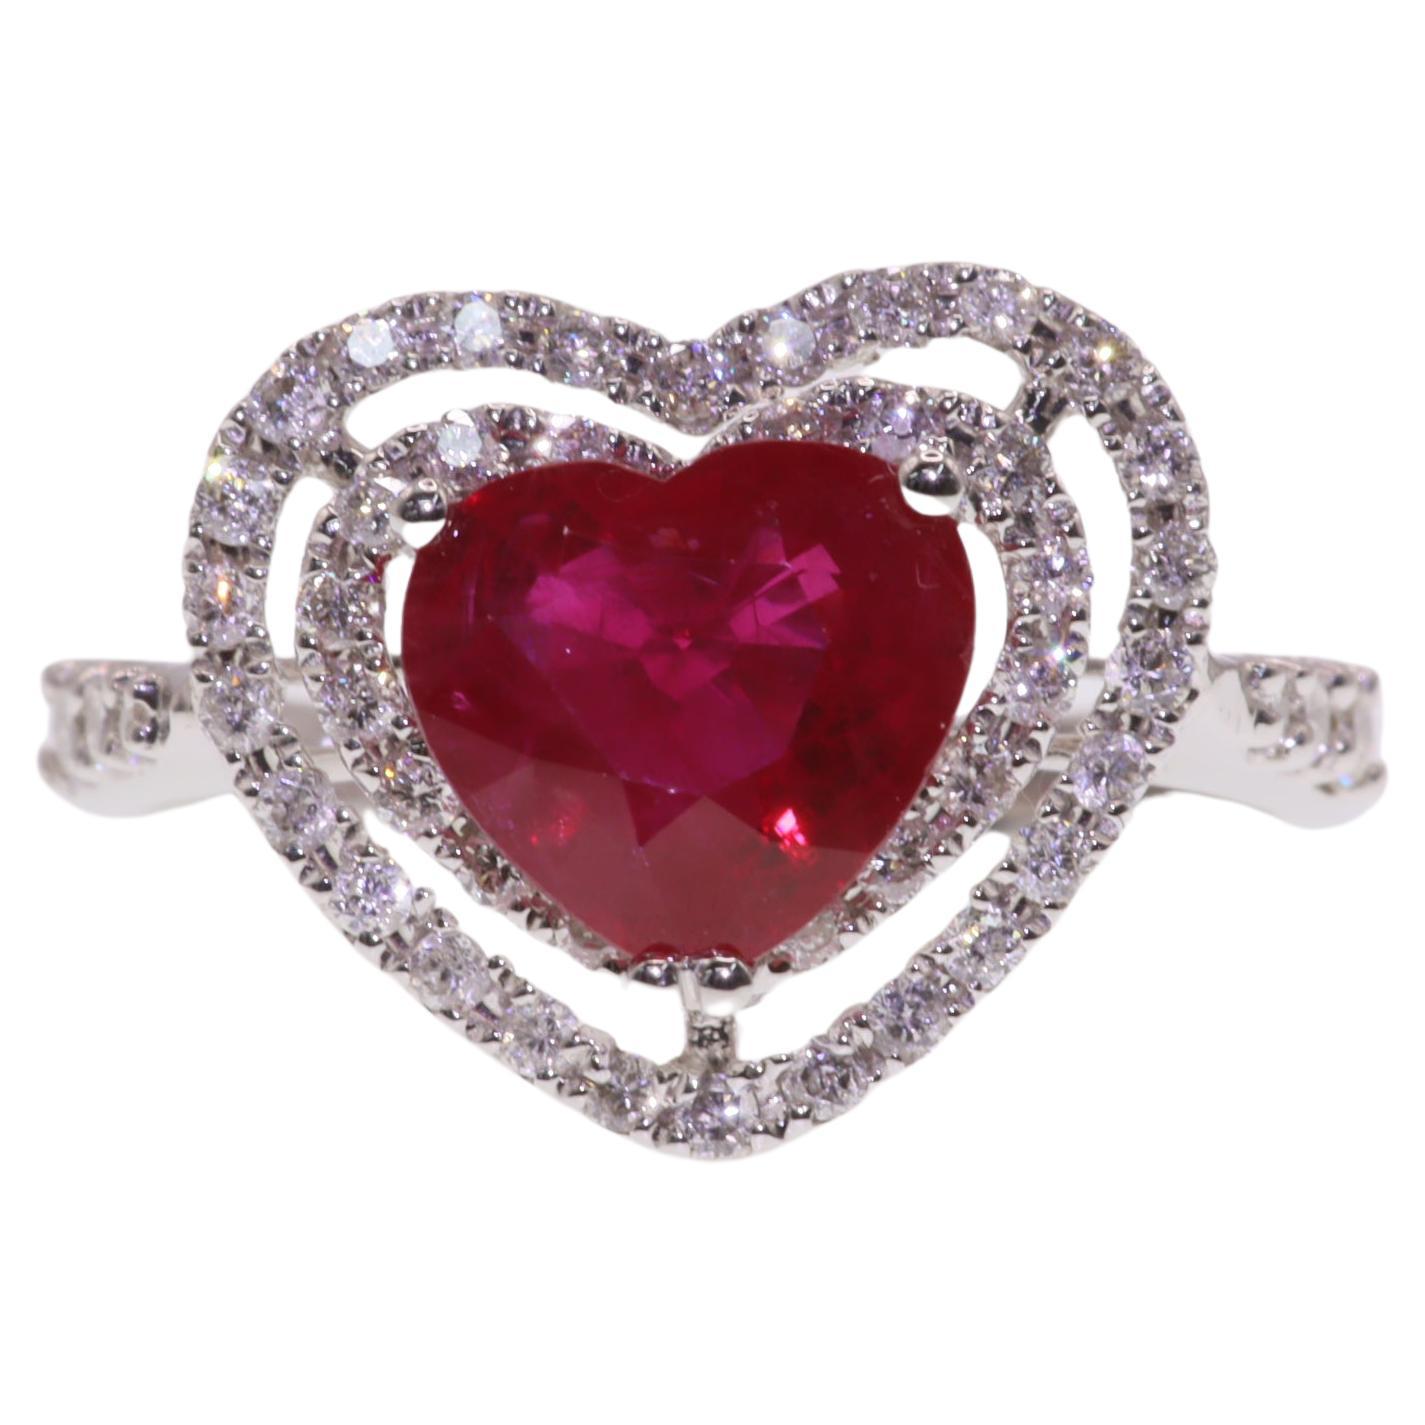 Indulge in the captivating beauty of this IGI Certified 1.48 Carat Heart-Shaped Ruby Ring. This exquisite piece features a stunning heart-shaped ruby, certified by IGI, in a vivid pinkish red color that is guaranteed to leave a lasting